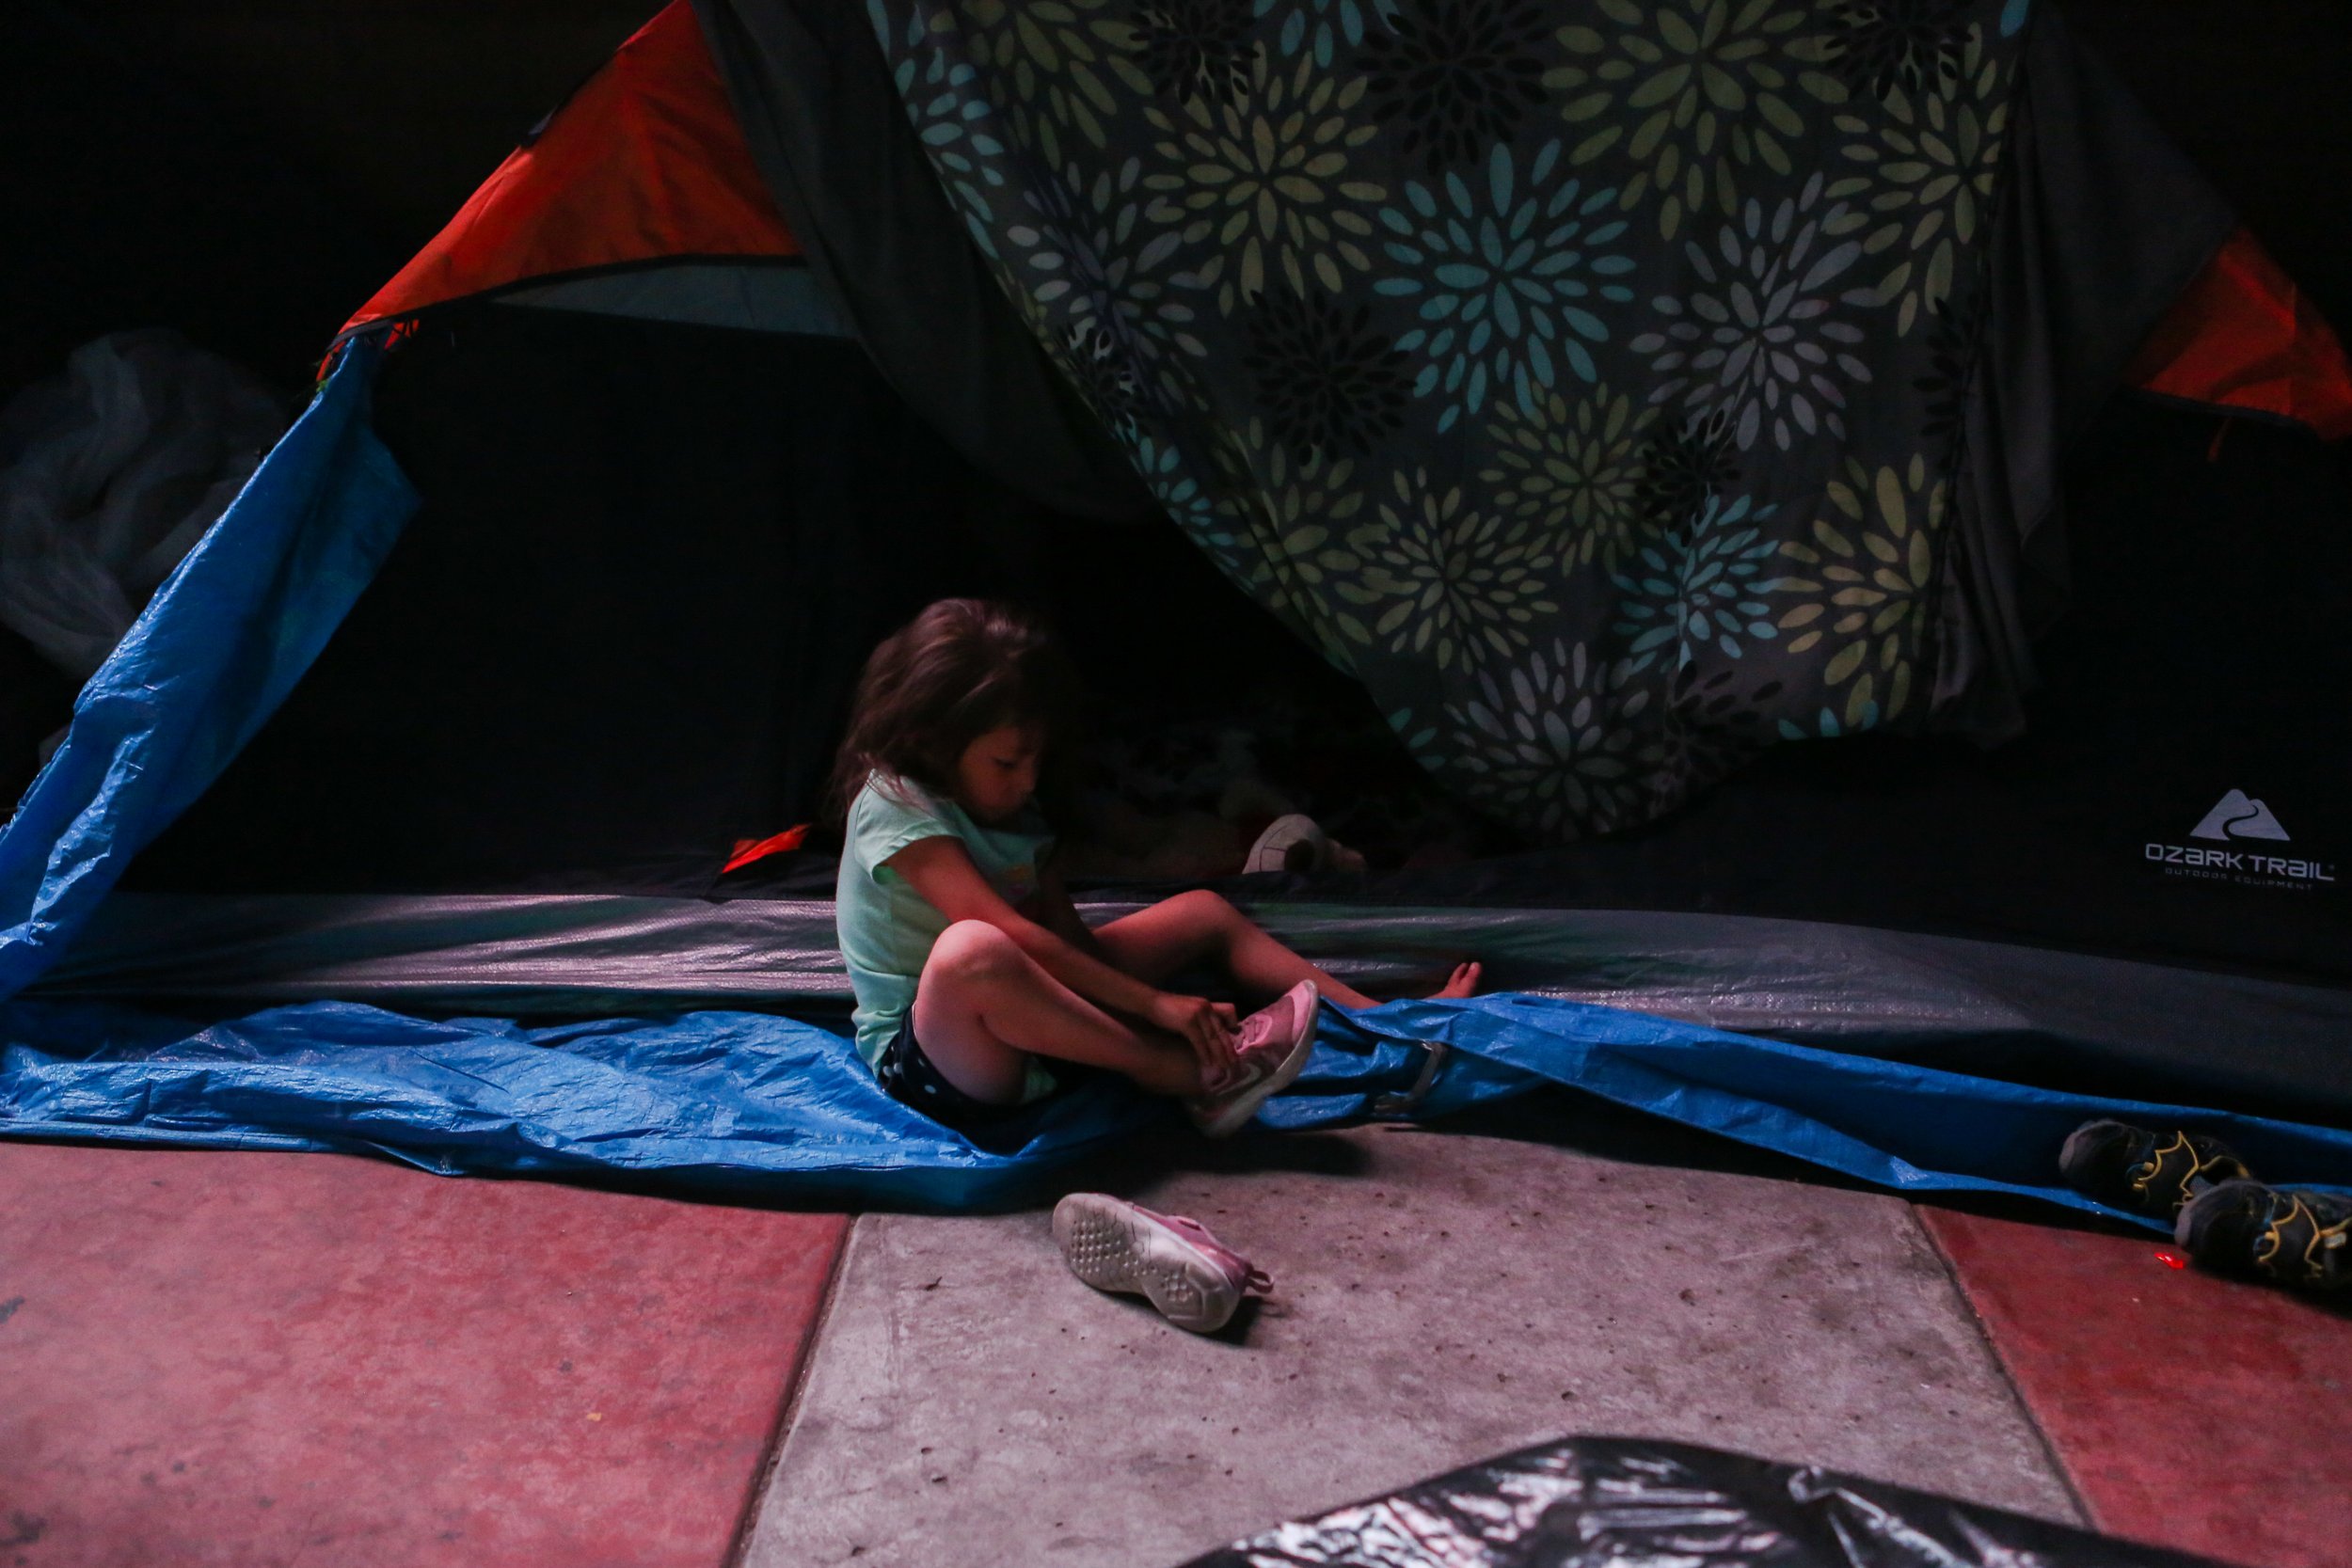  A girl puts on her shoes outside her tent in Tijuana, Mexico. 